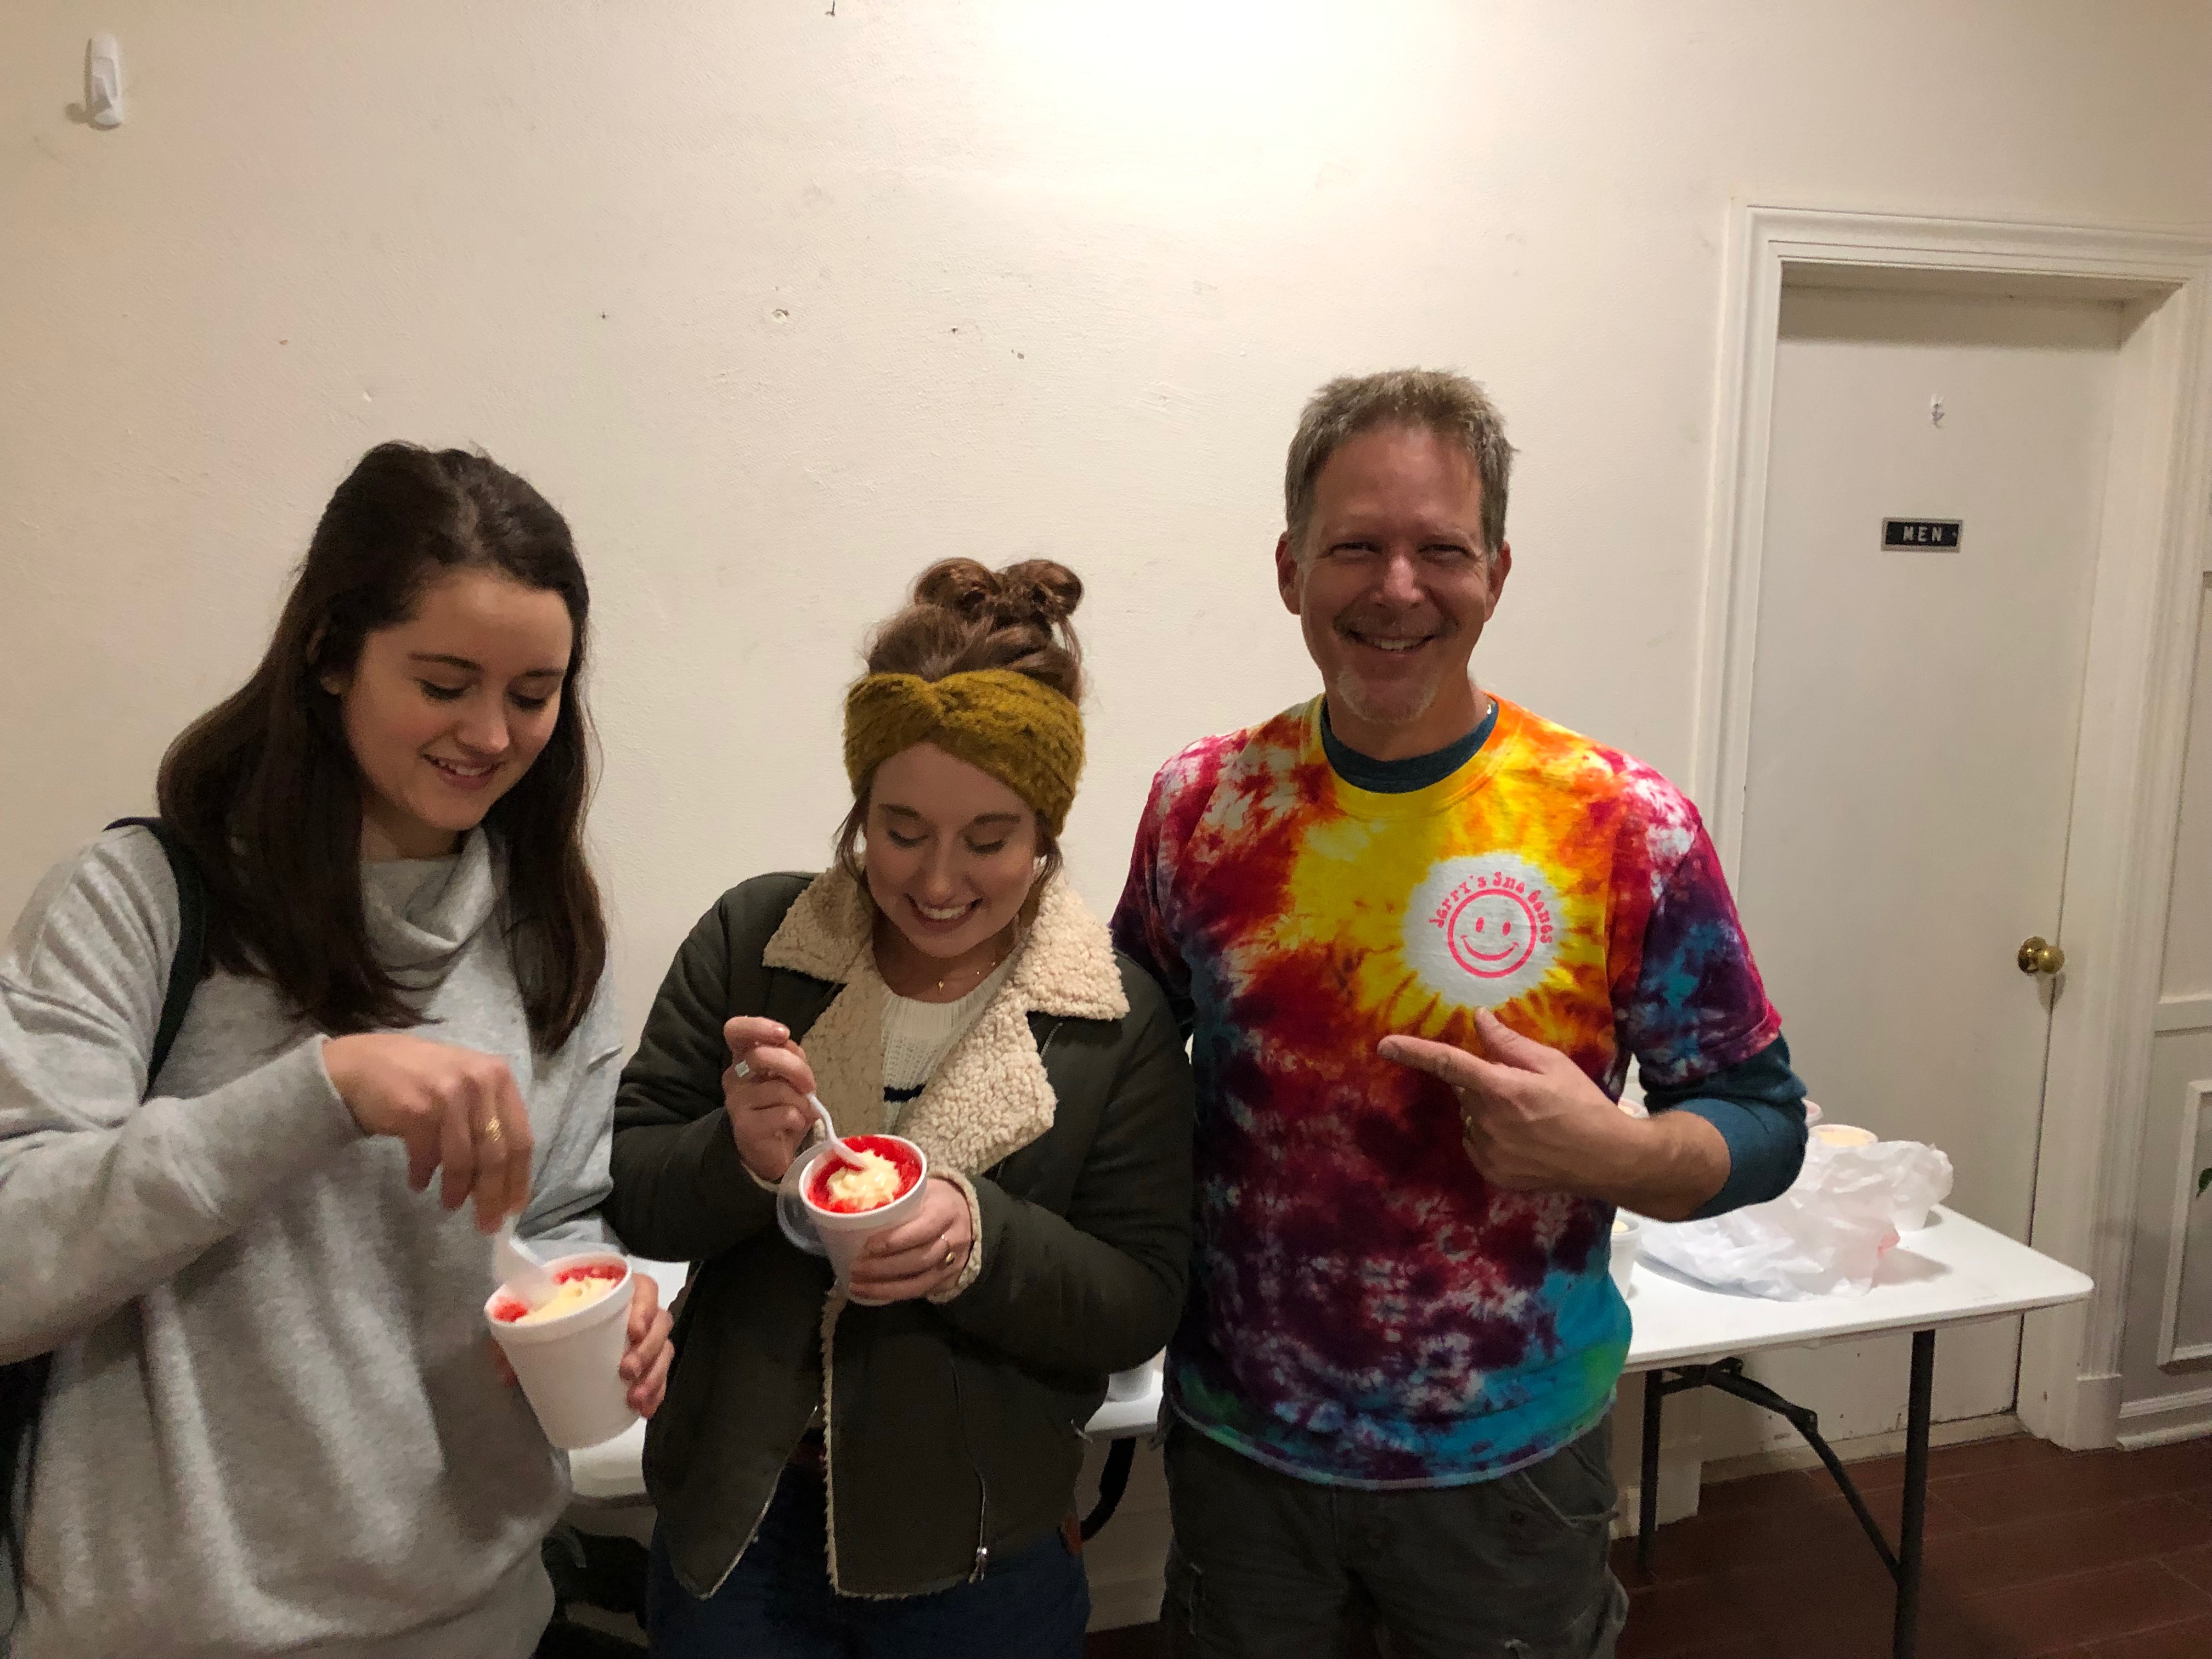 Audience members Emily Hall and Claire Jaggers enjoy a free sno-cone with Jerry’s Sno-Cone owner David Aklin before the show. (Scarlet Ponder)